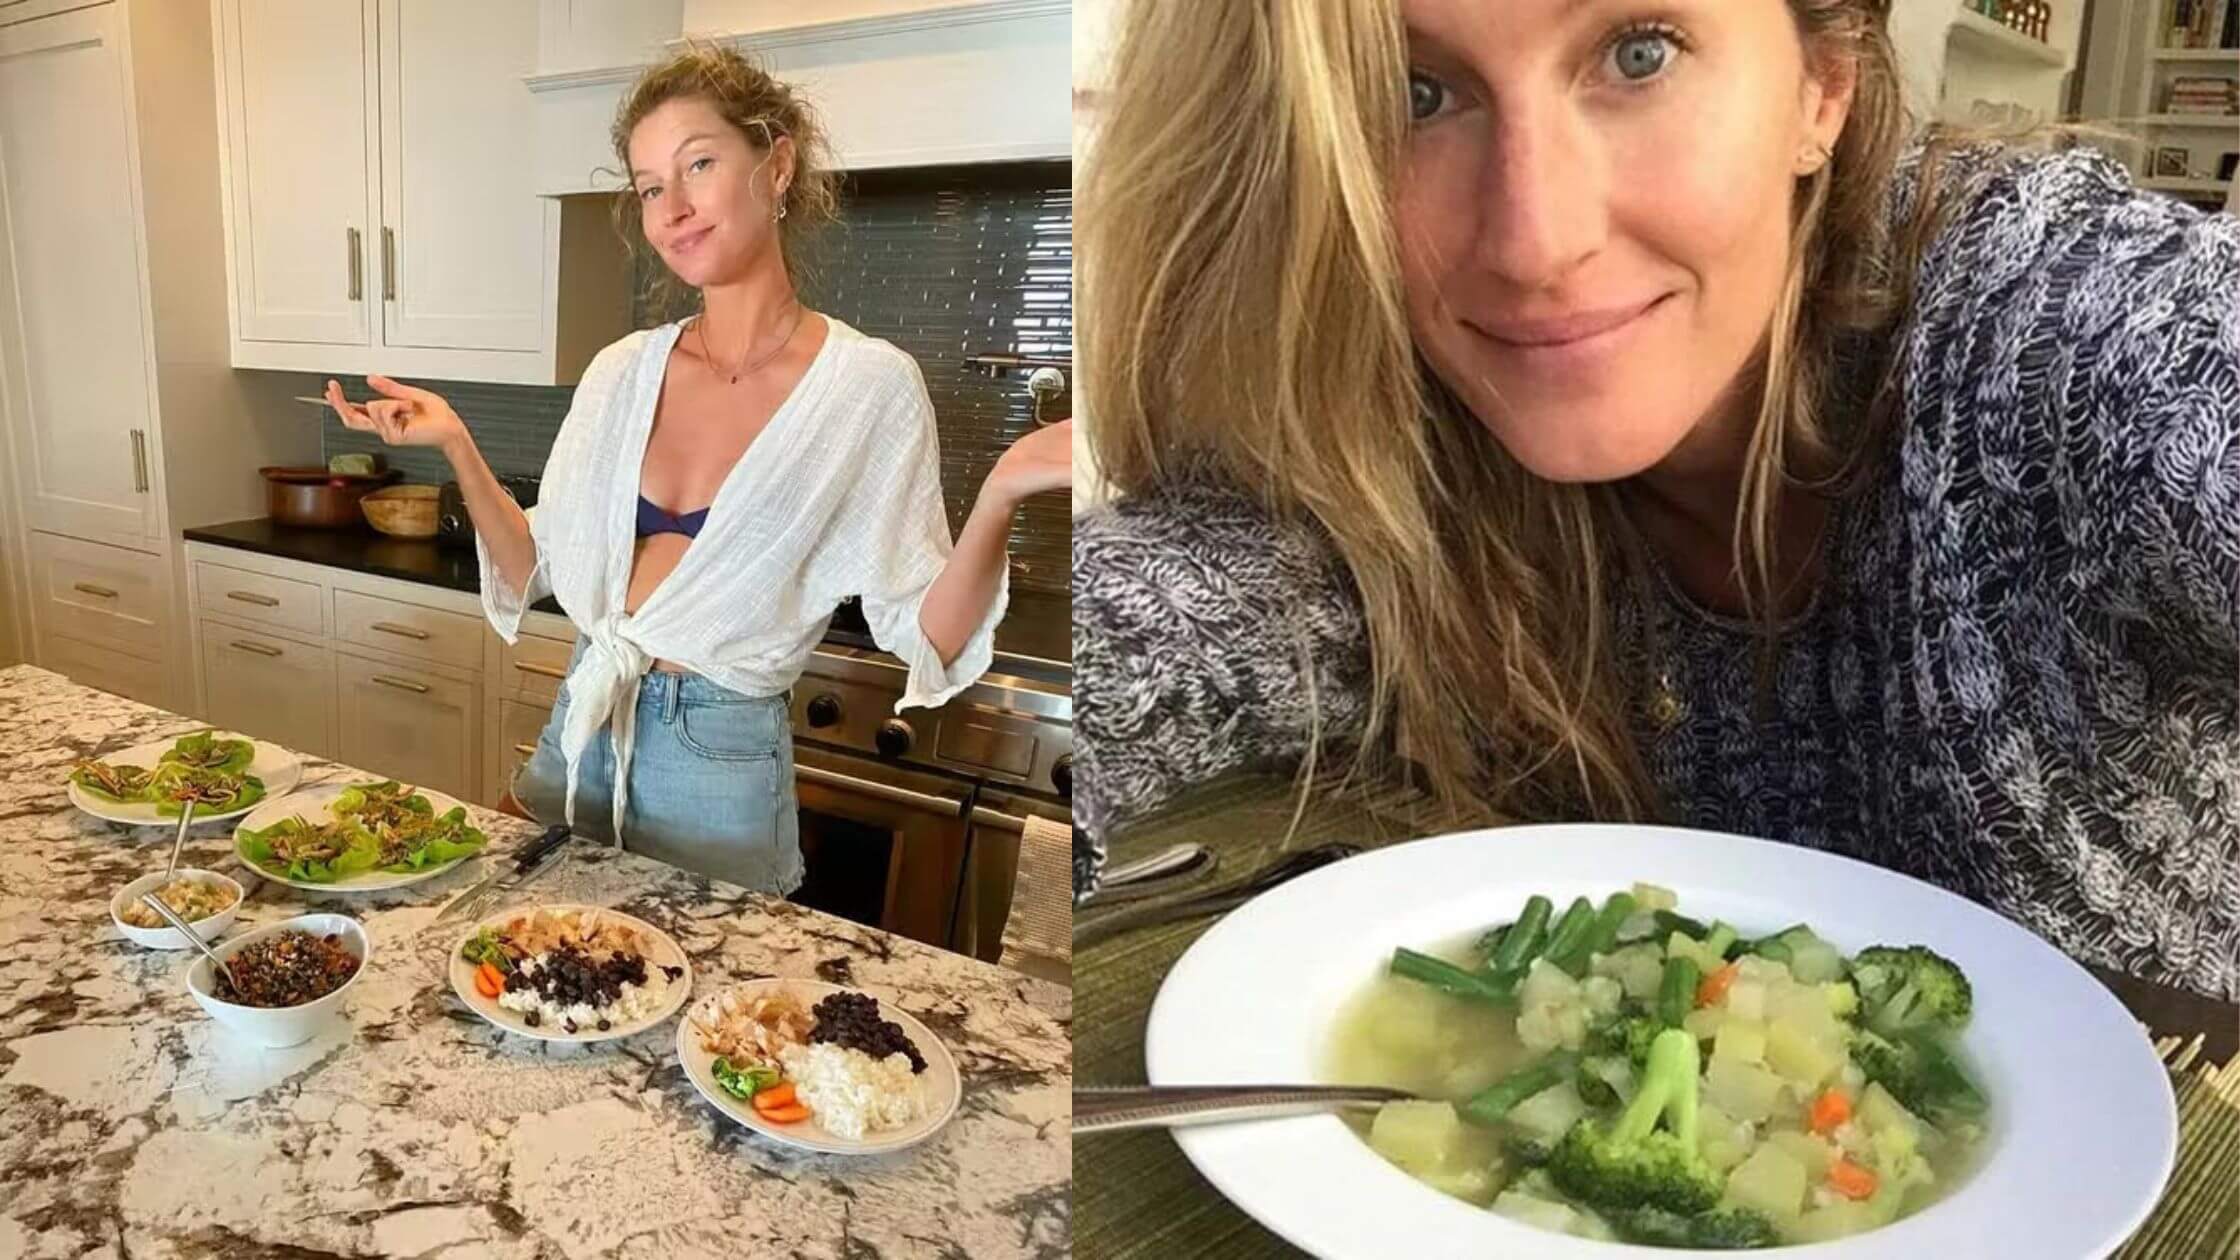 Gisele Bündchen's Diet Is Based On Whole Foods And Plants